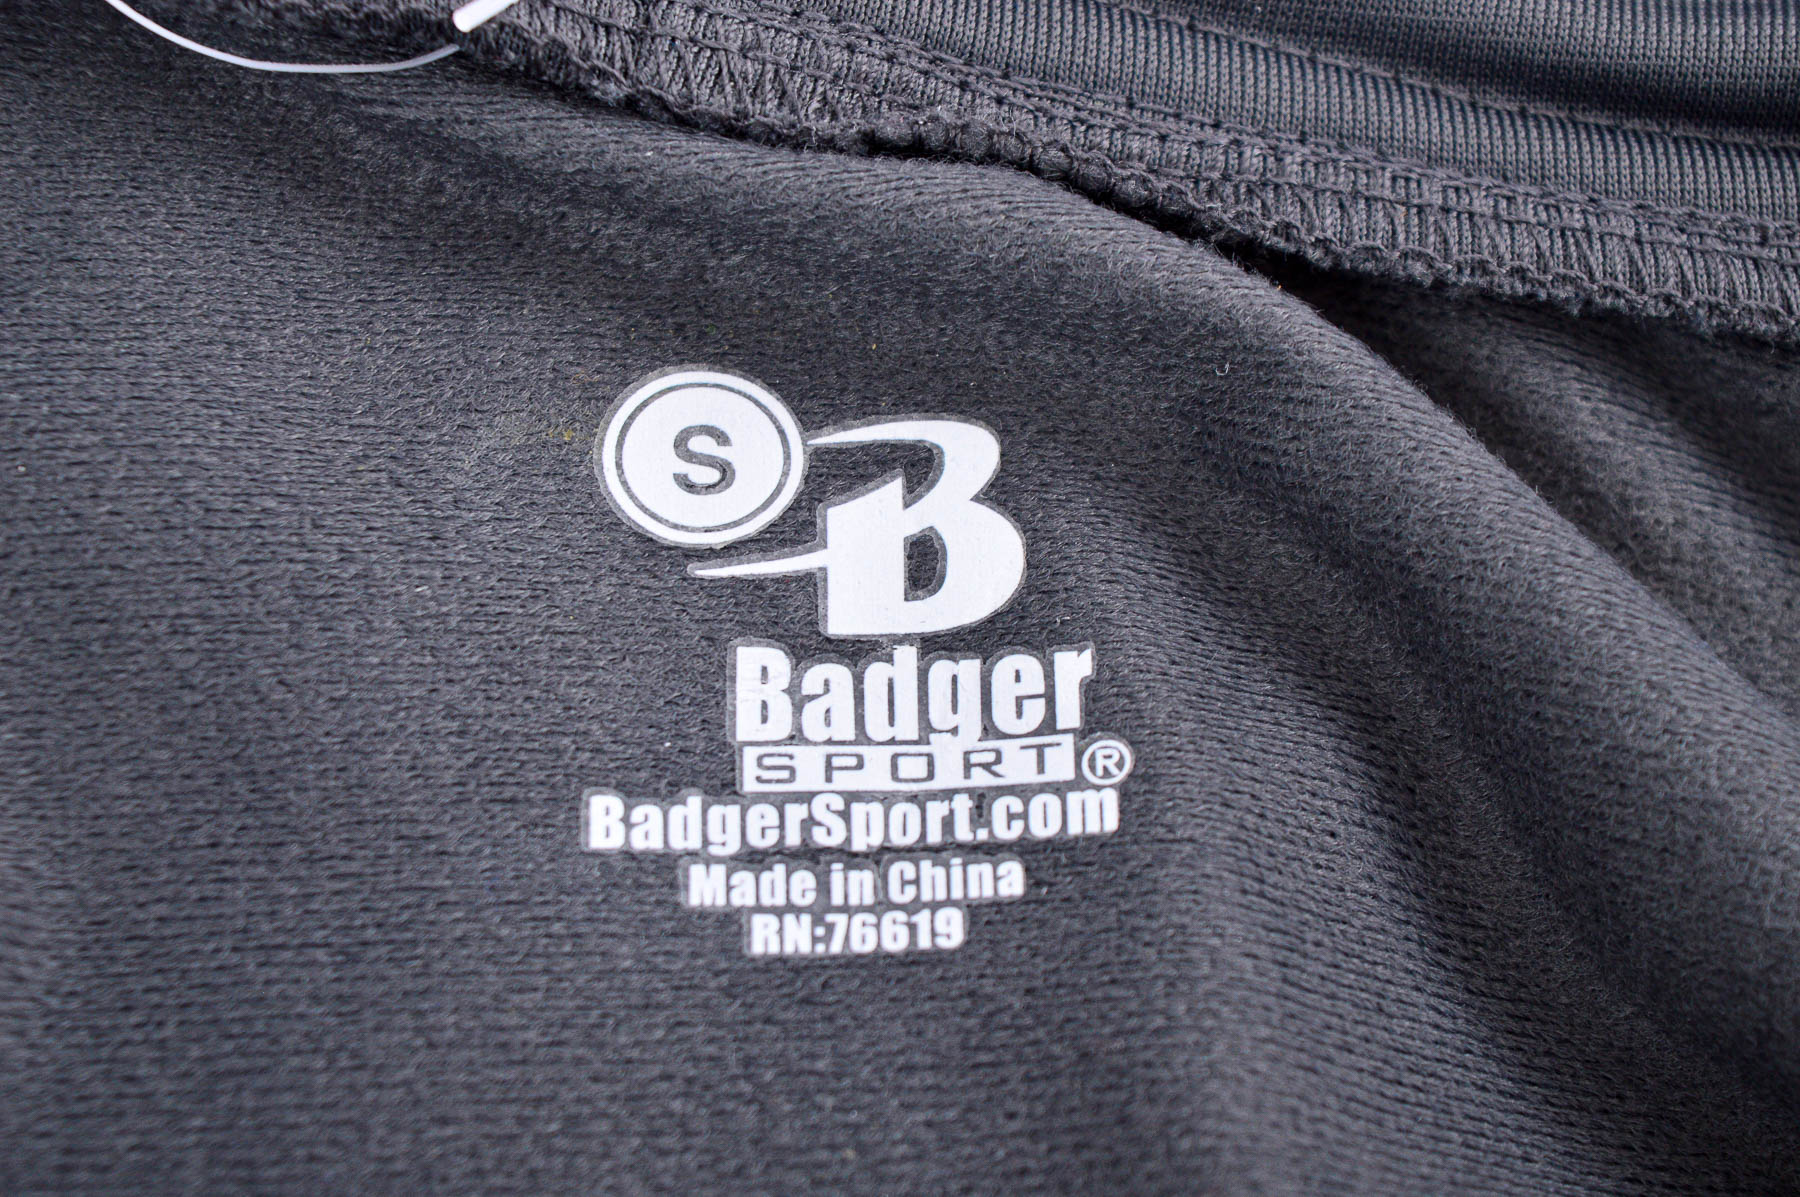 Male sports top - Badger Sport - 2